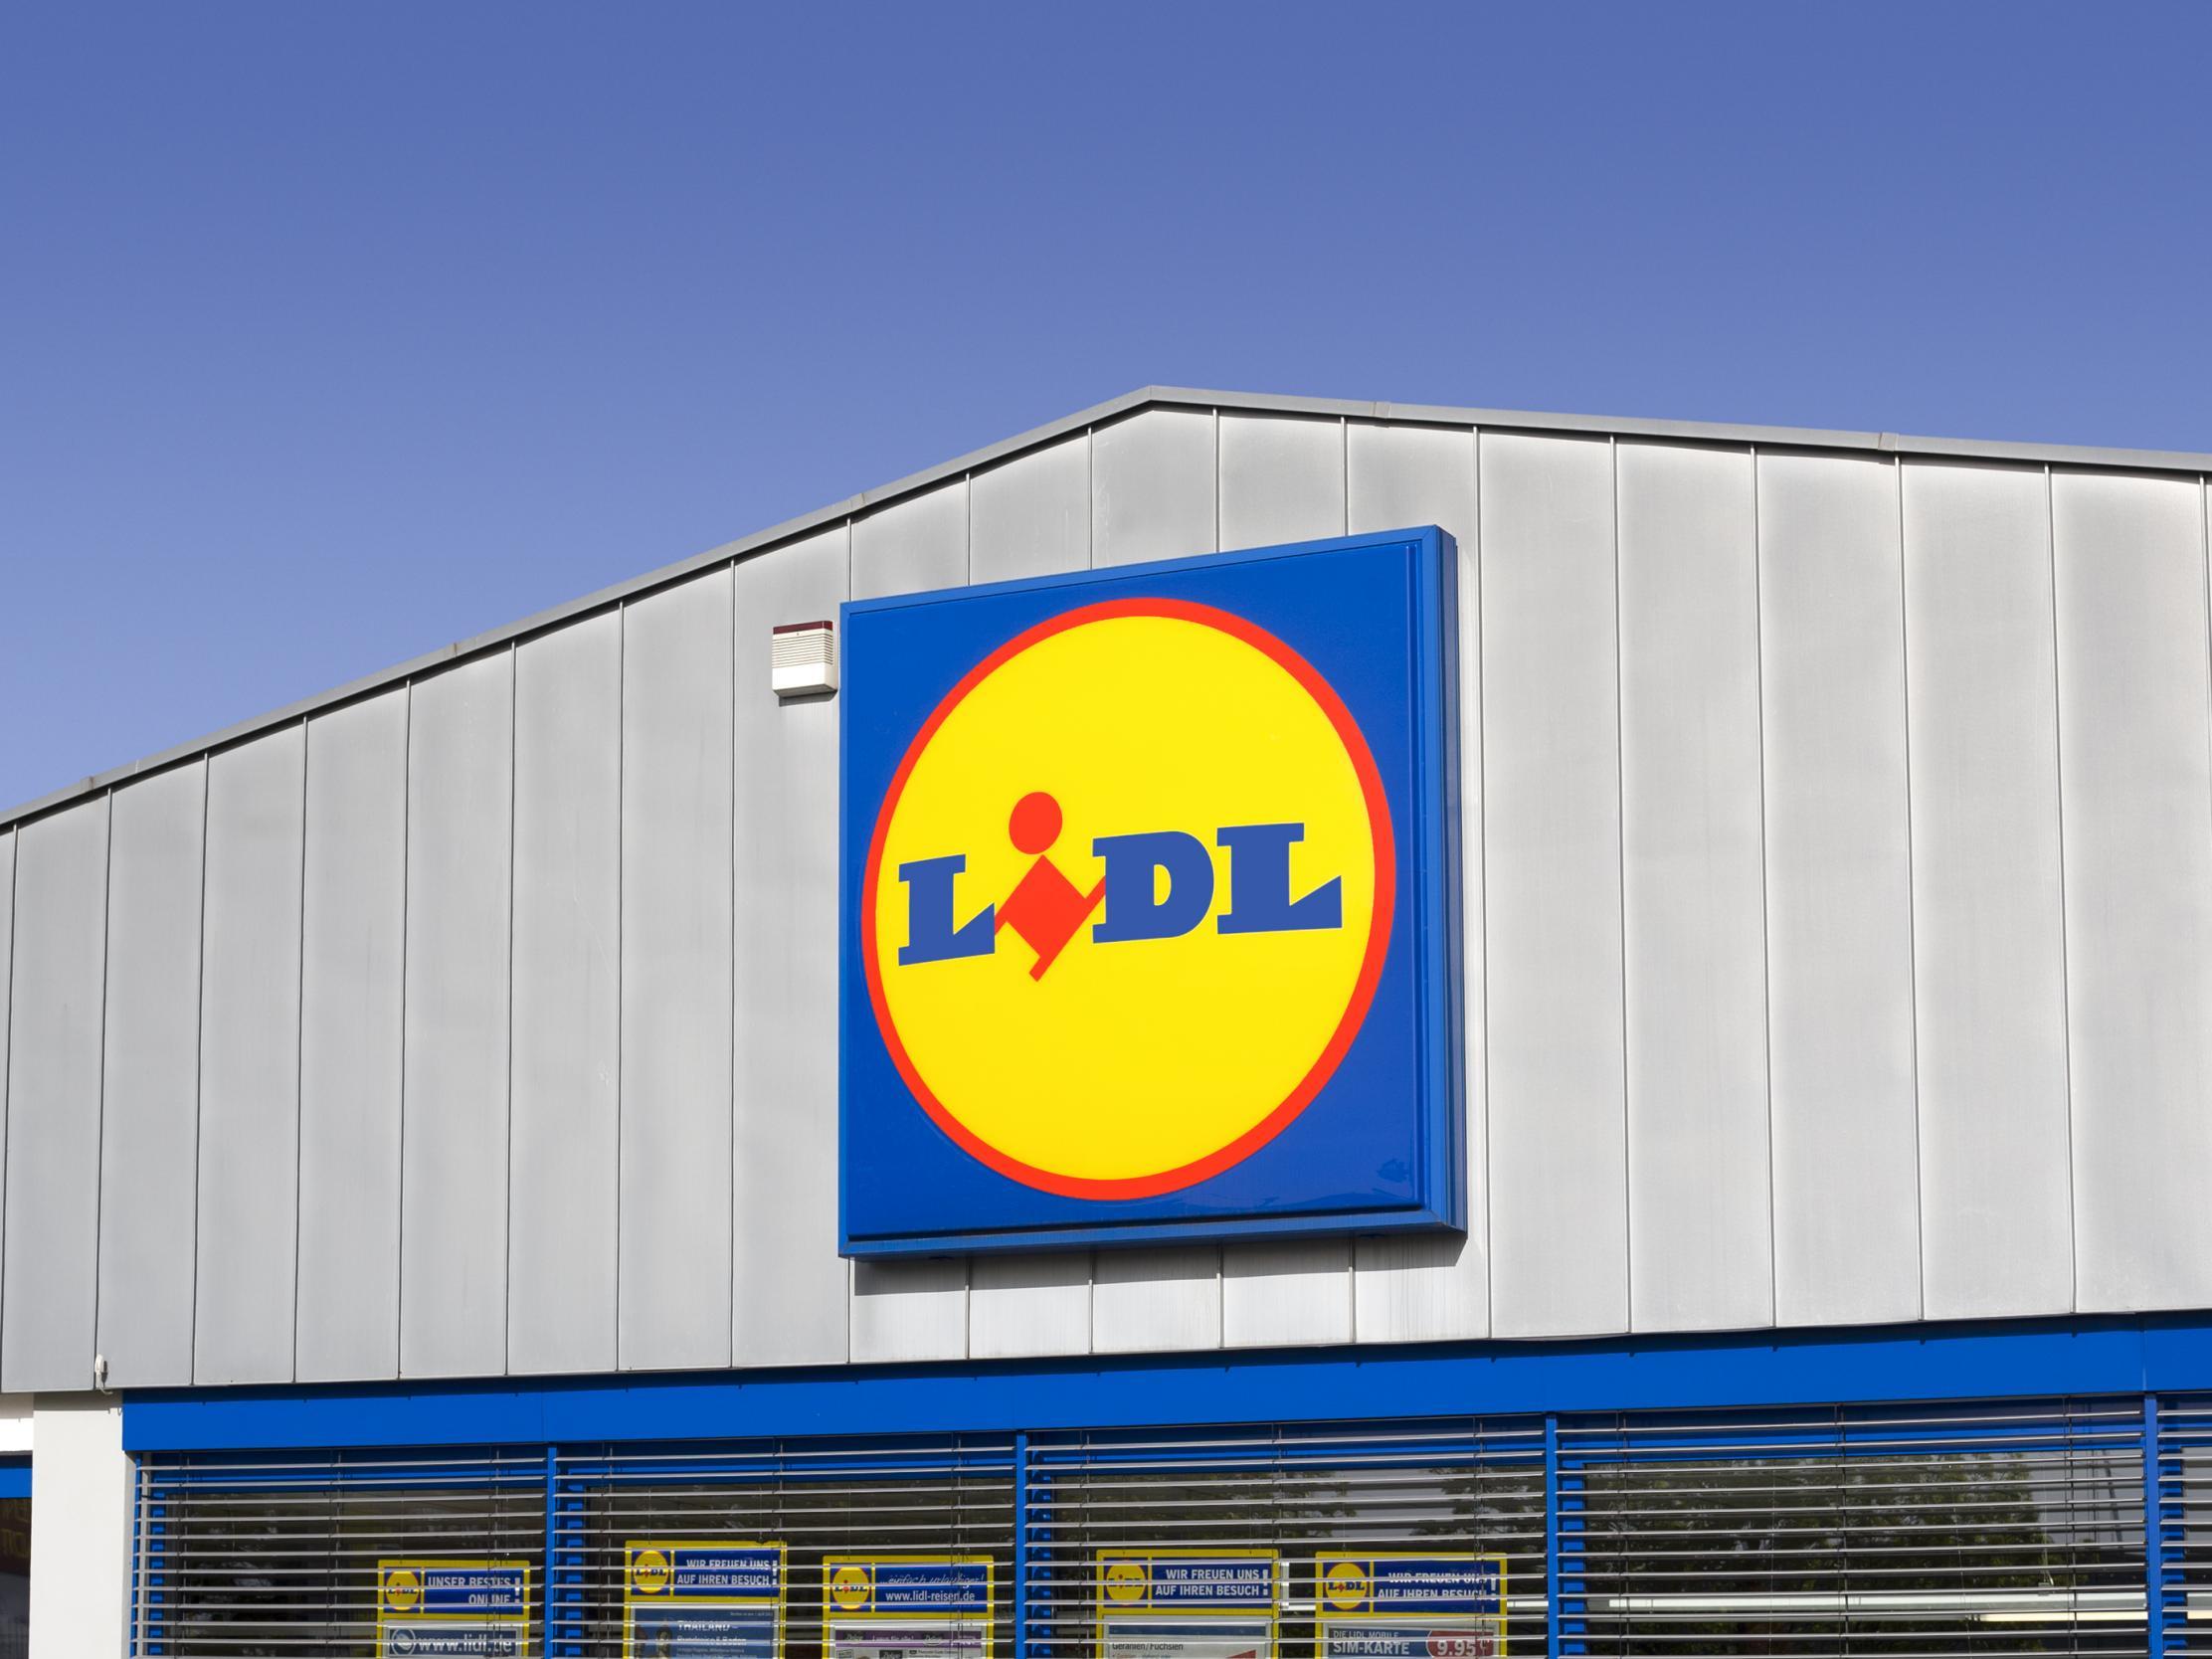 Lidl was among supermarkets initially excluded from the scheme